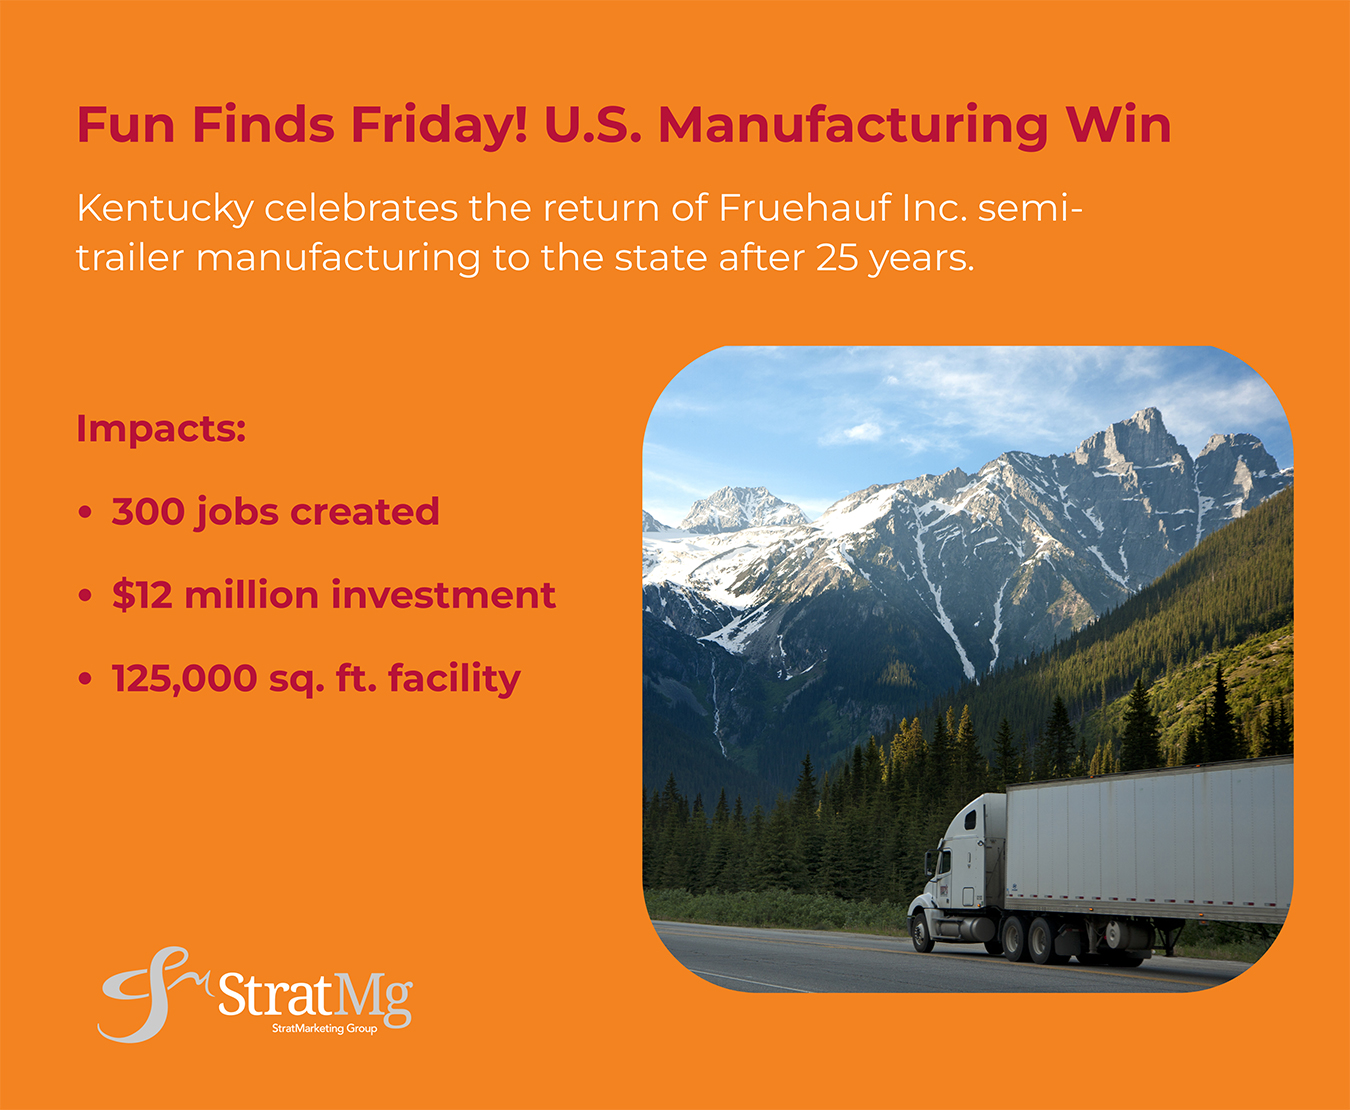 The return of Fruehauf trailer manufacturing impacts are shown along with an image of a semi-trailer truck driving on a road with snow-capped mountains in the background.